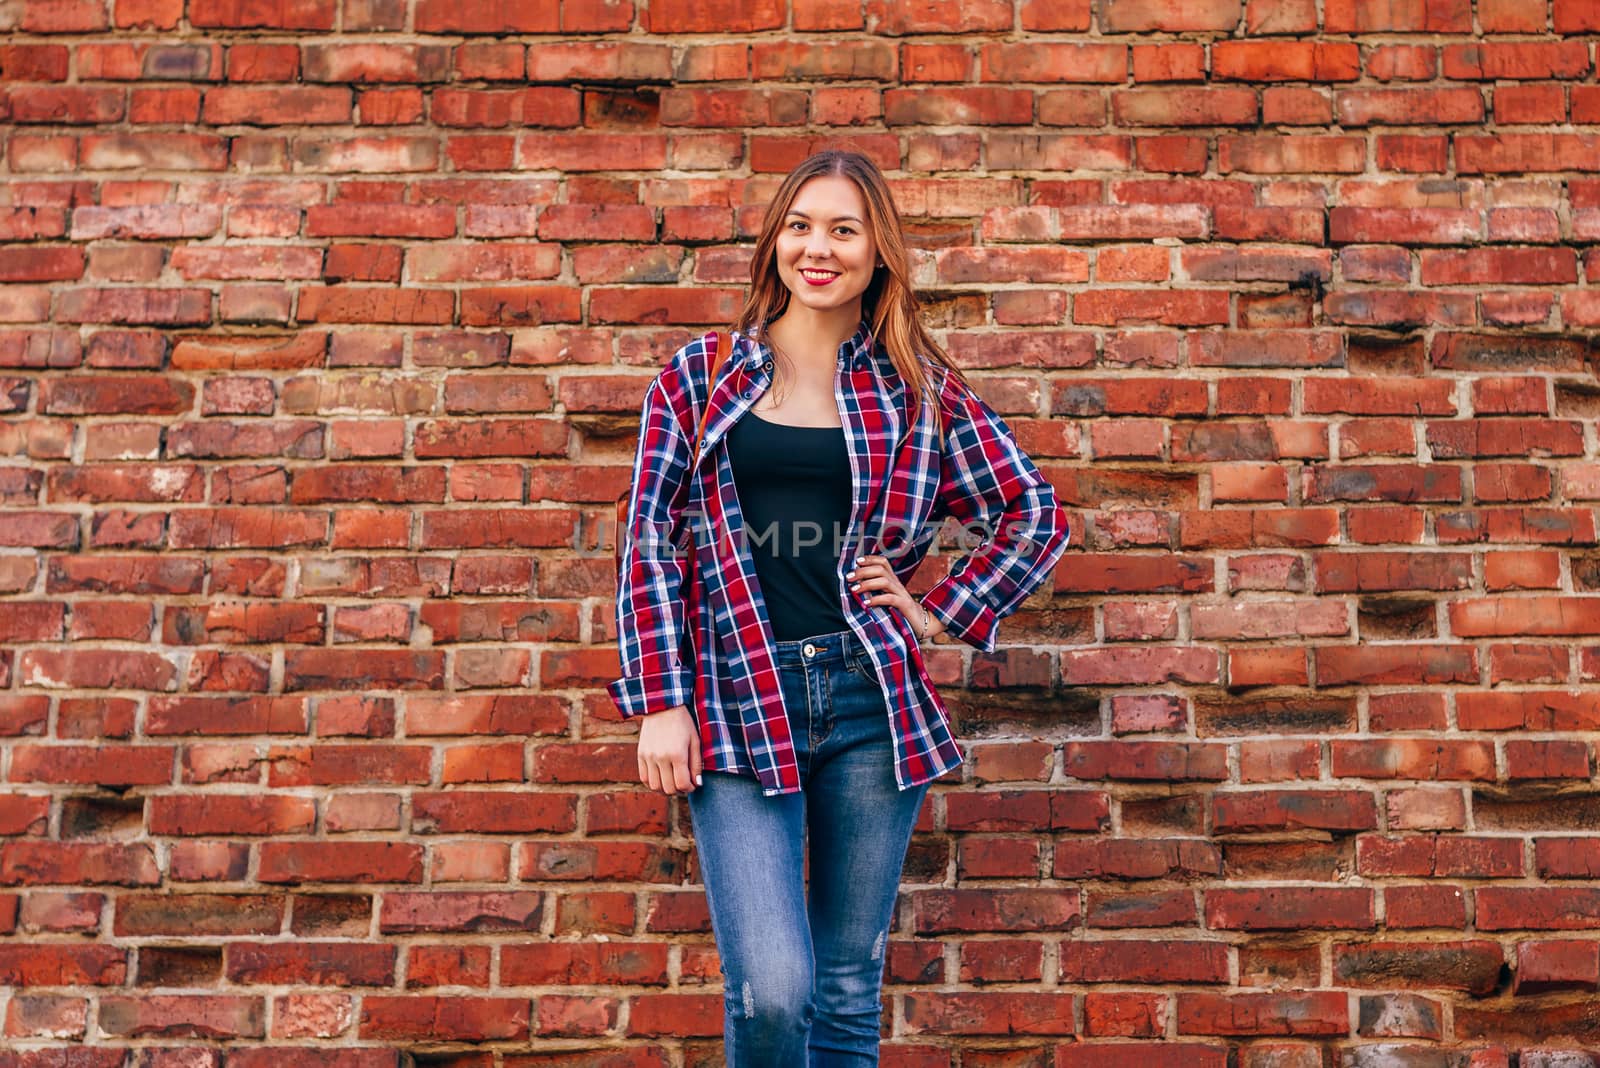 Portrait of young woman in checkered shirt and blue jeans standing against red brick wall